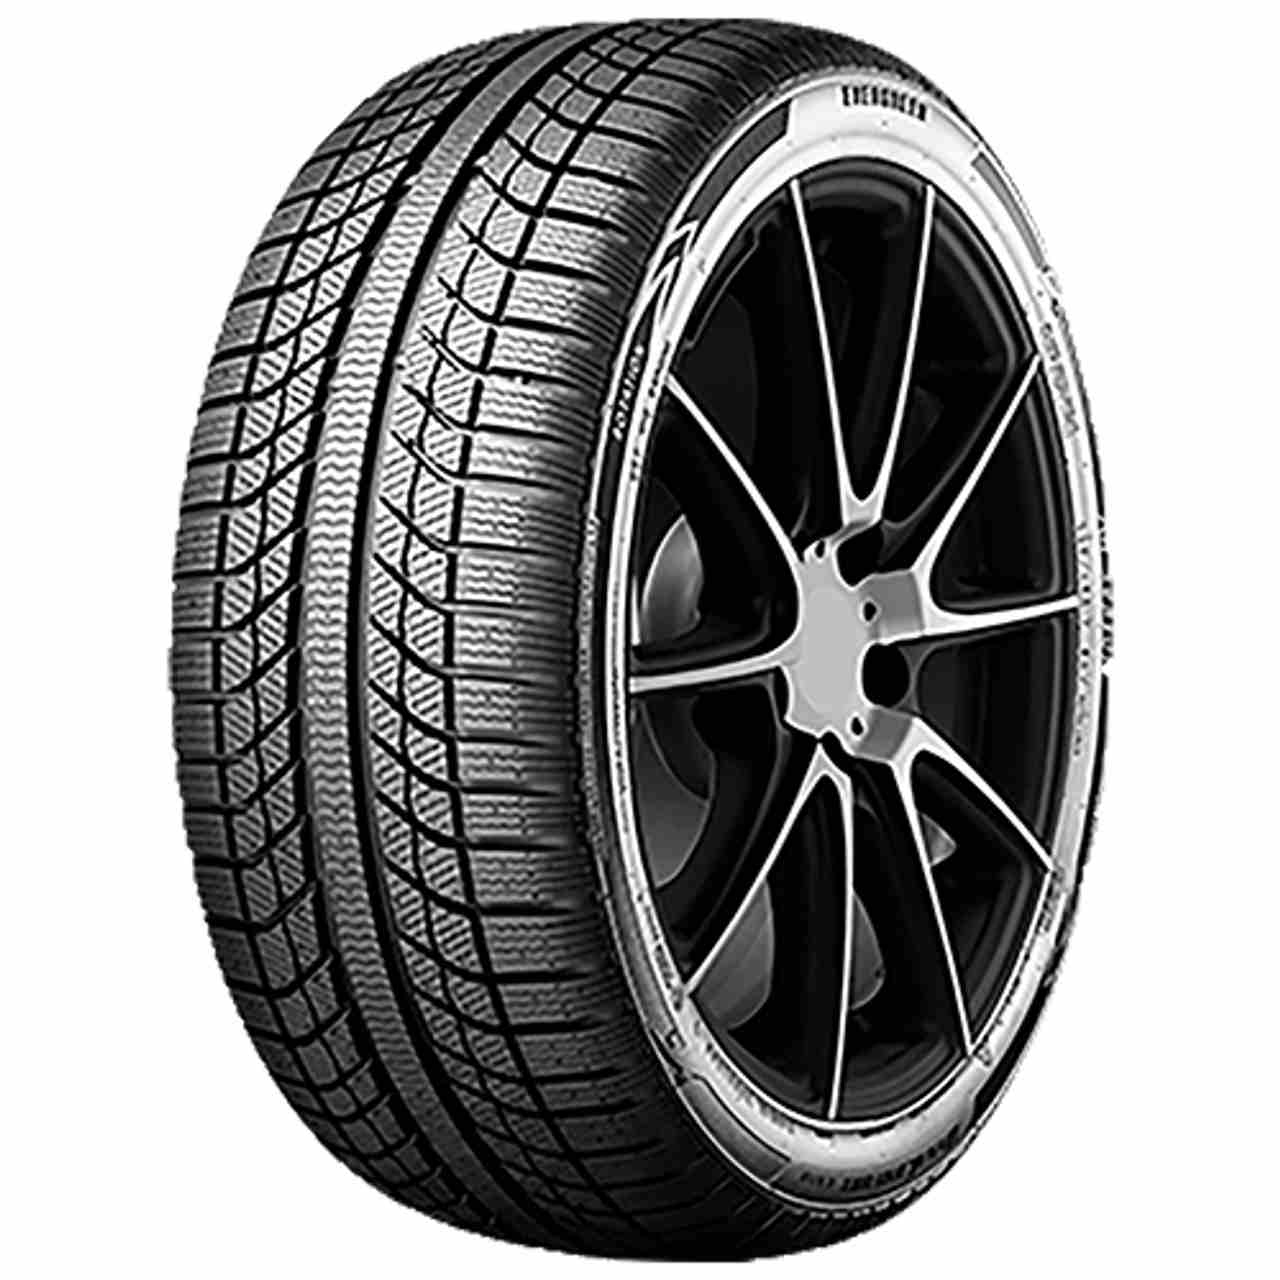 EVERGREEN DYNACOMFORT EA719 185/55R15 82H BSW